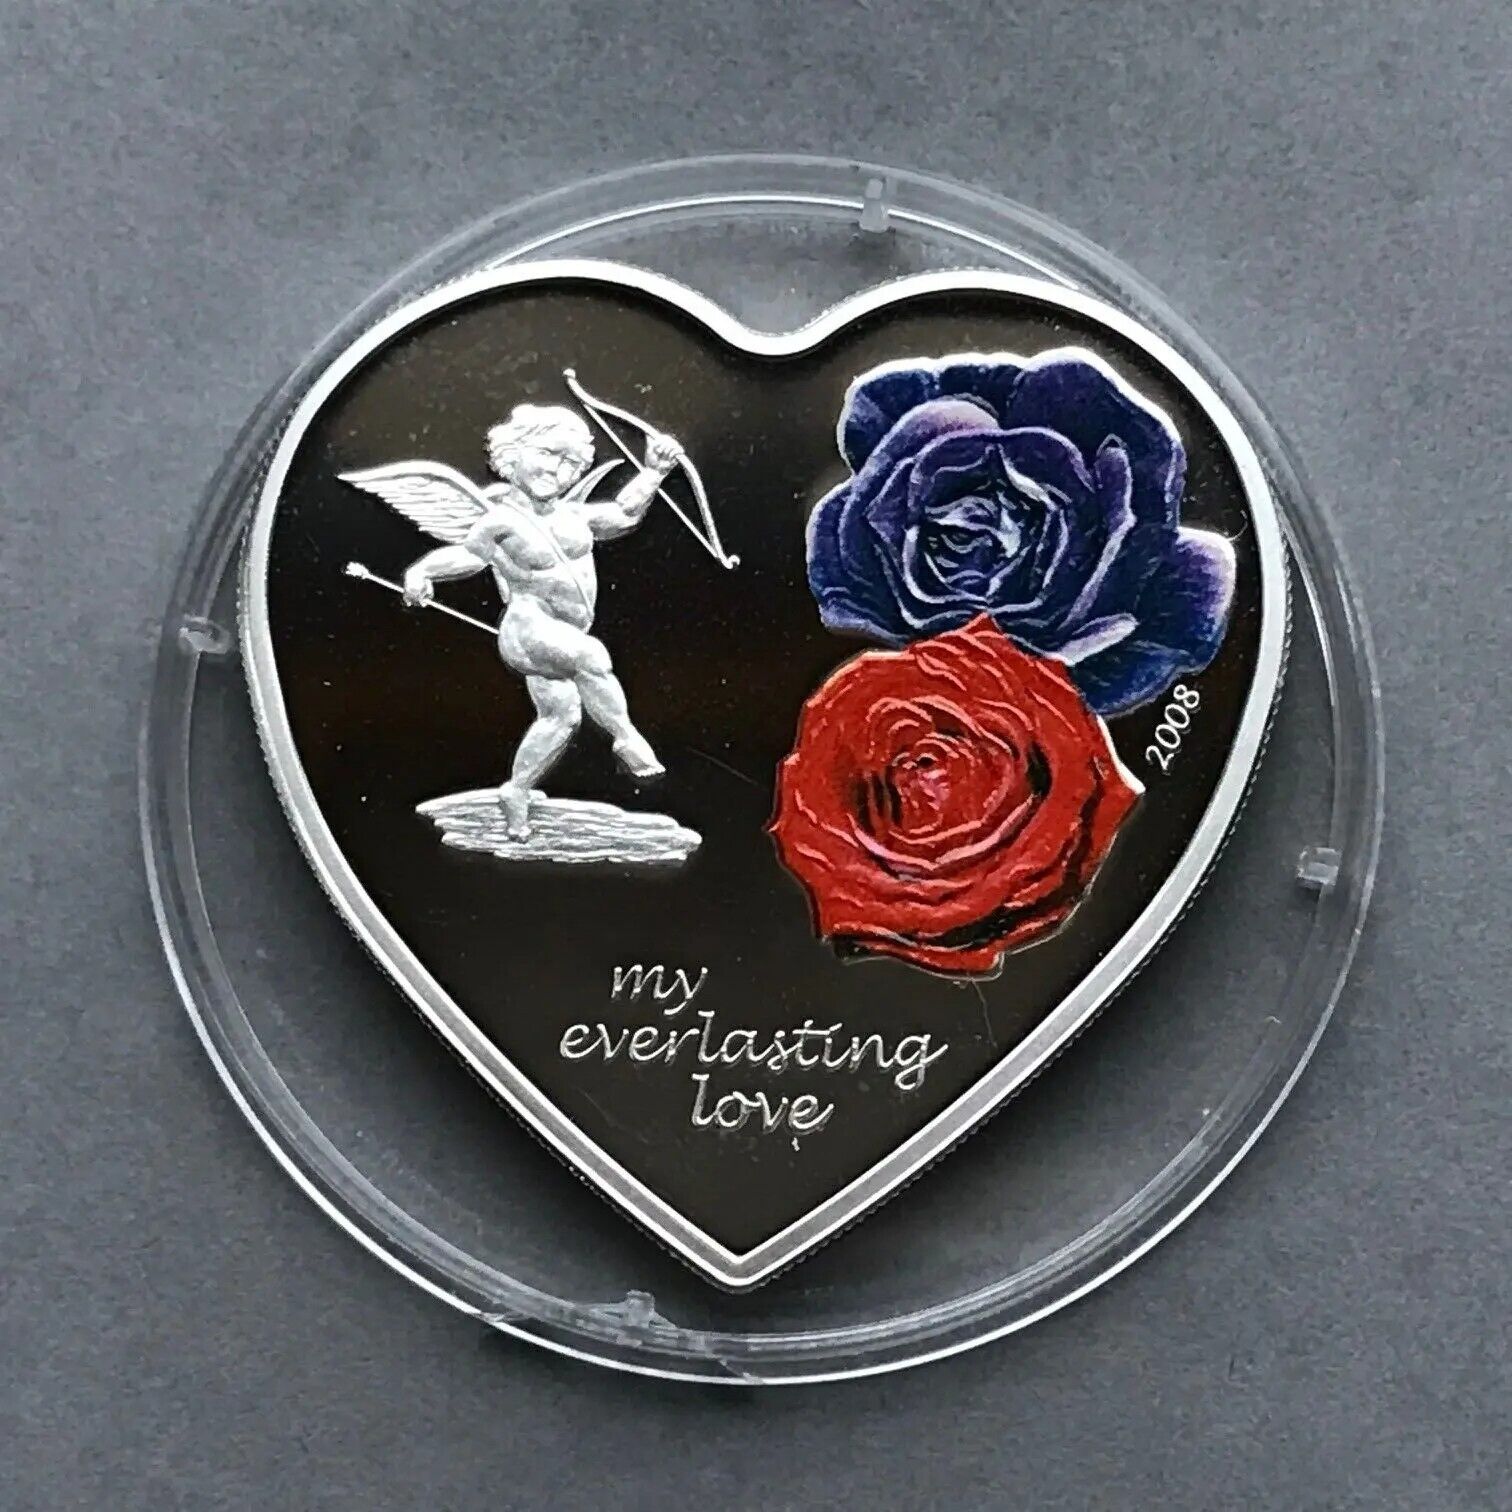 25g Silver Coin 2008 Cook Islands $5 My Everlasting Love Heart Shaped Cupid-classypw.com-3